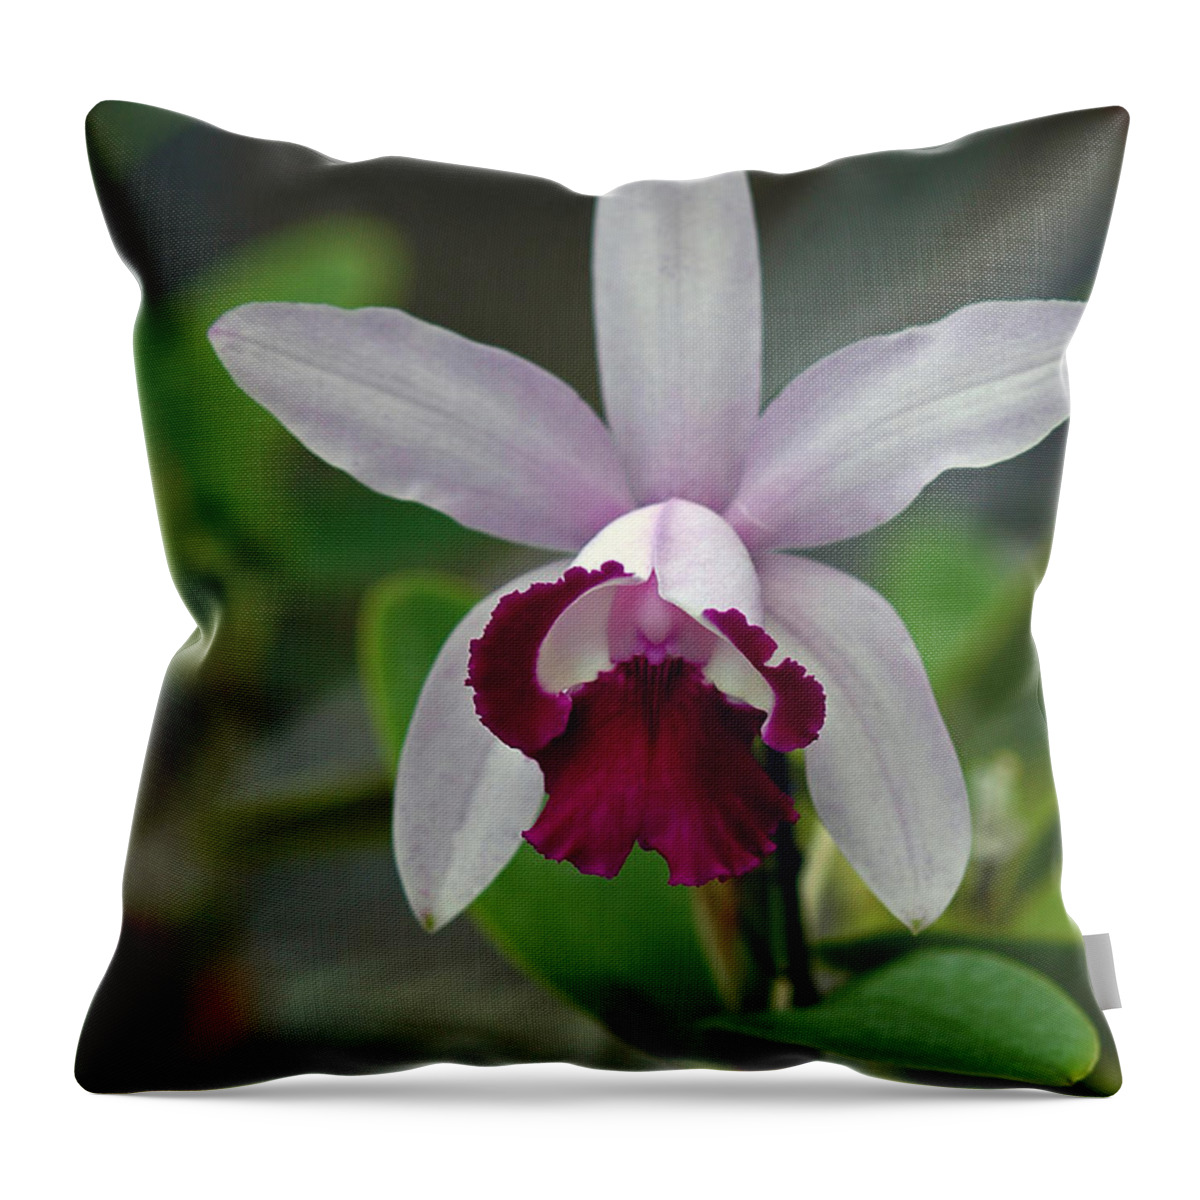 Cattleya Orchid Throw Pillow featuring the photograph Cattleya Ordhid by Winston D Munnings